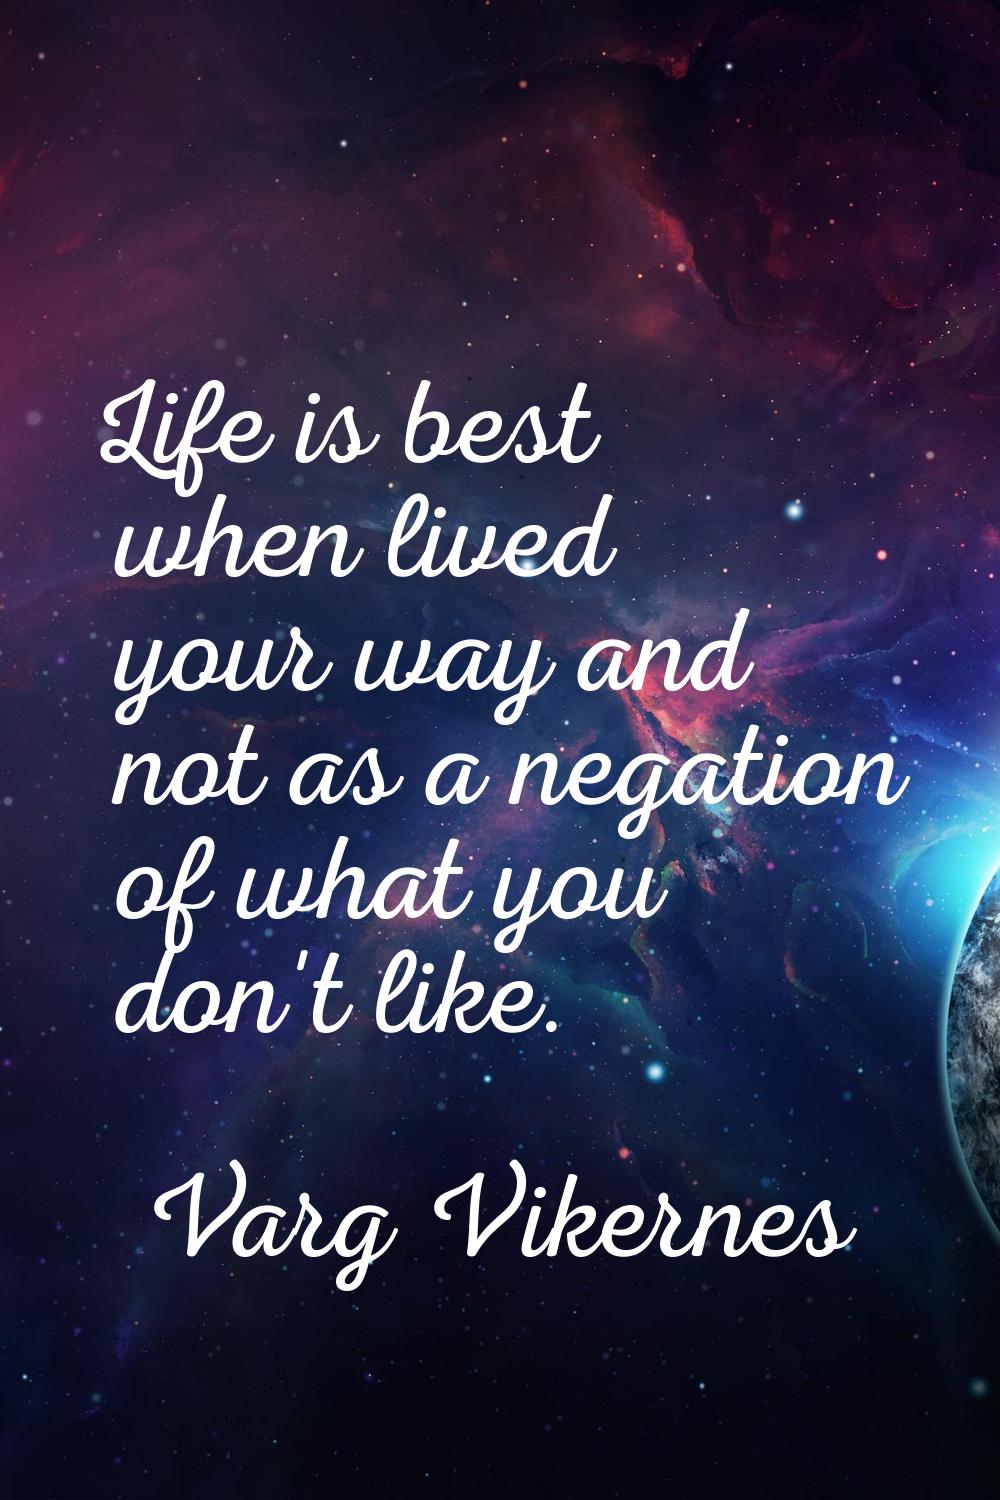 Life is best when lived your way and not as a negation of what you don't like.